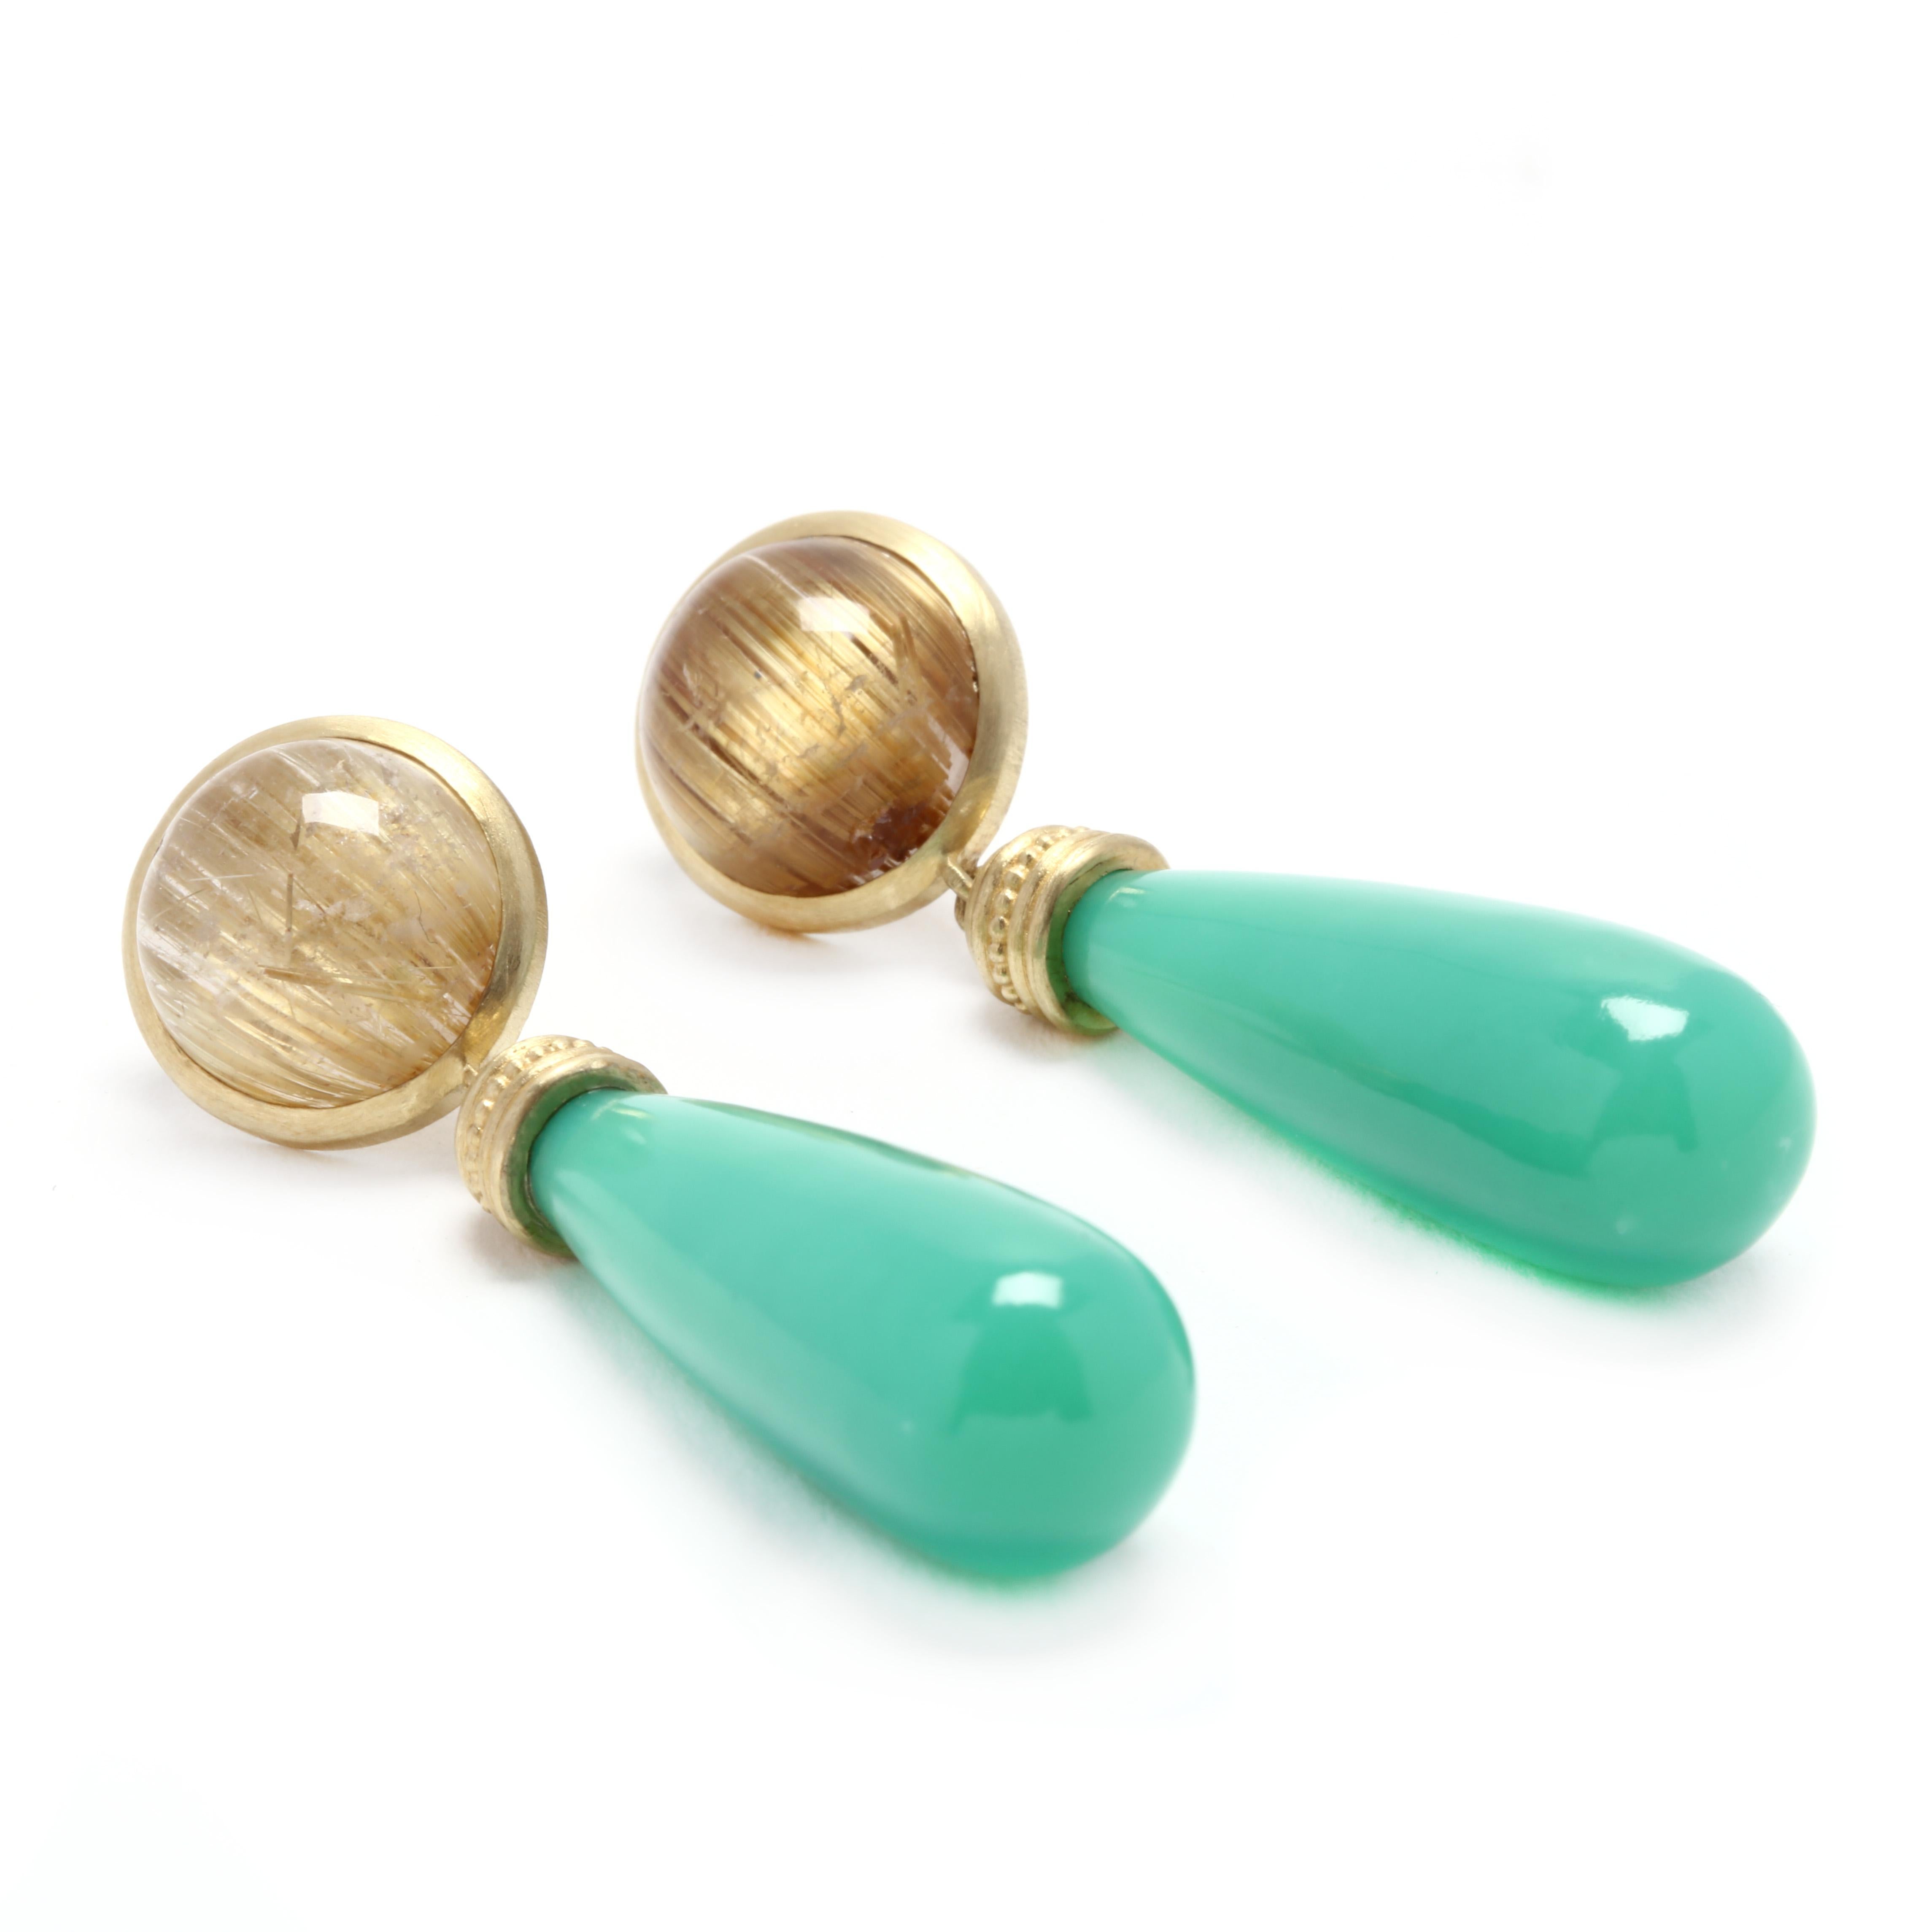 A pair of 14 karat yellow gold rutilated quartz and chrysoprase dangle earrings. These earrings feature round cabochon rutilated quartz studs, each with an oblong green chrsyoprase dangle and with pierced push backs.

Stones:
- rutilated quartz, 2